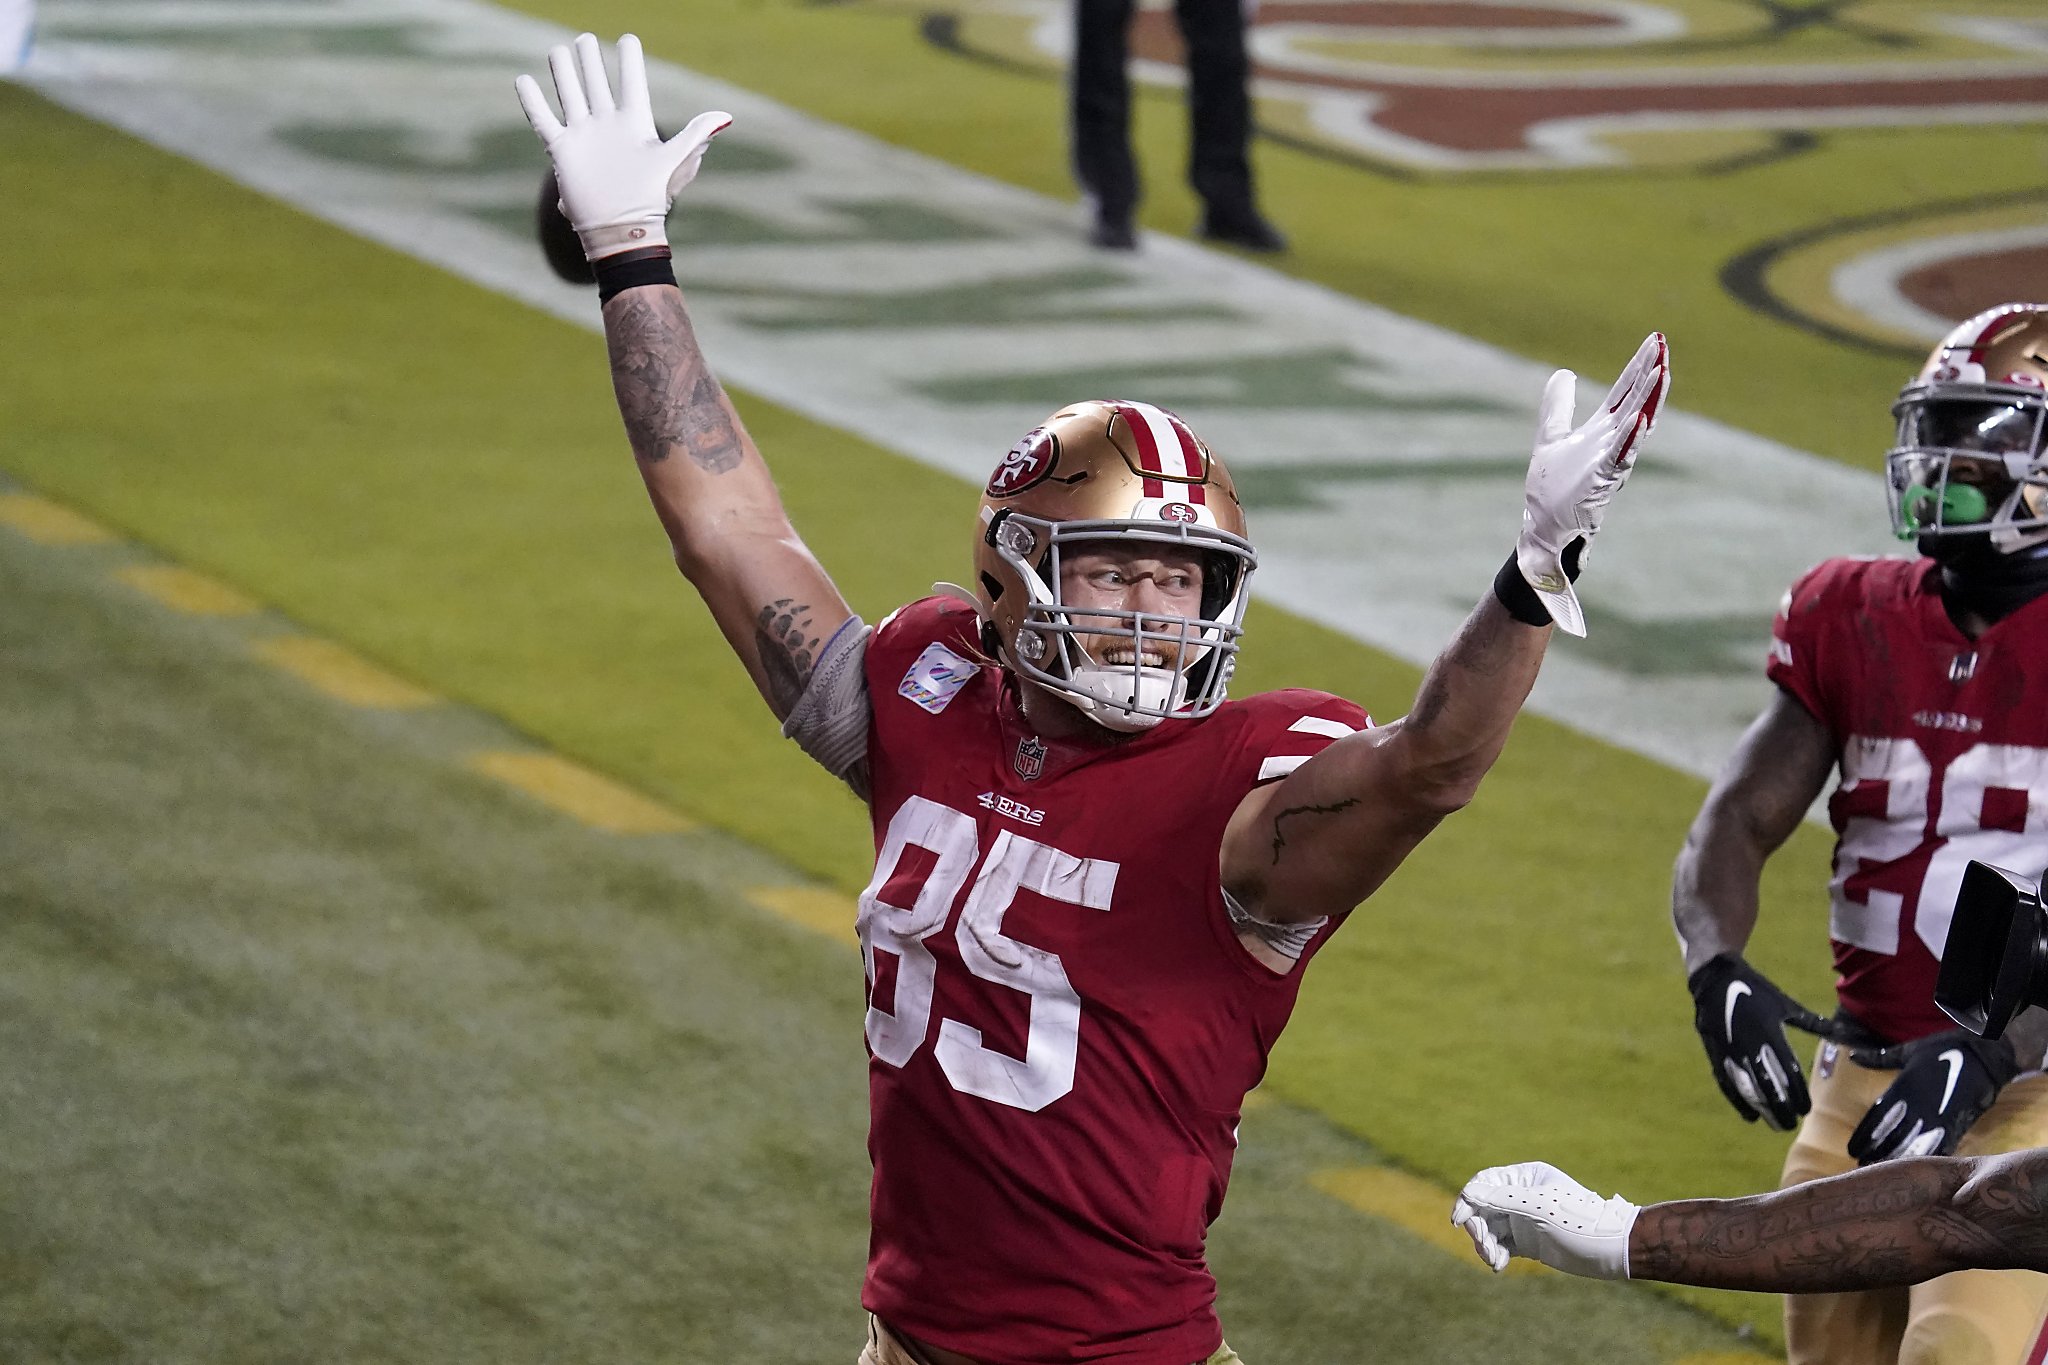 49ers news: George Kittle is unexpected to play against the